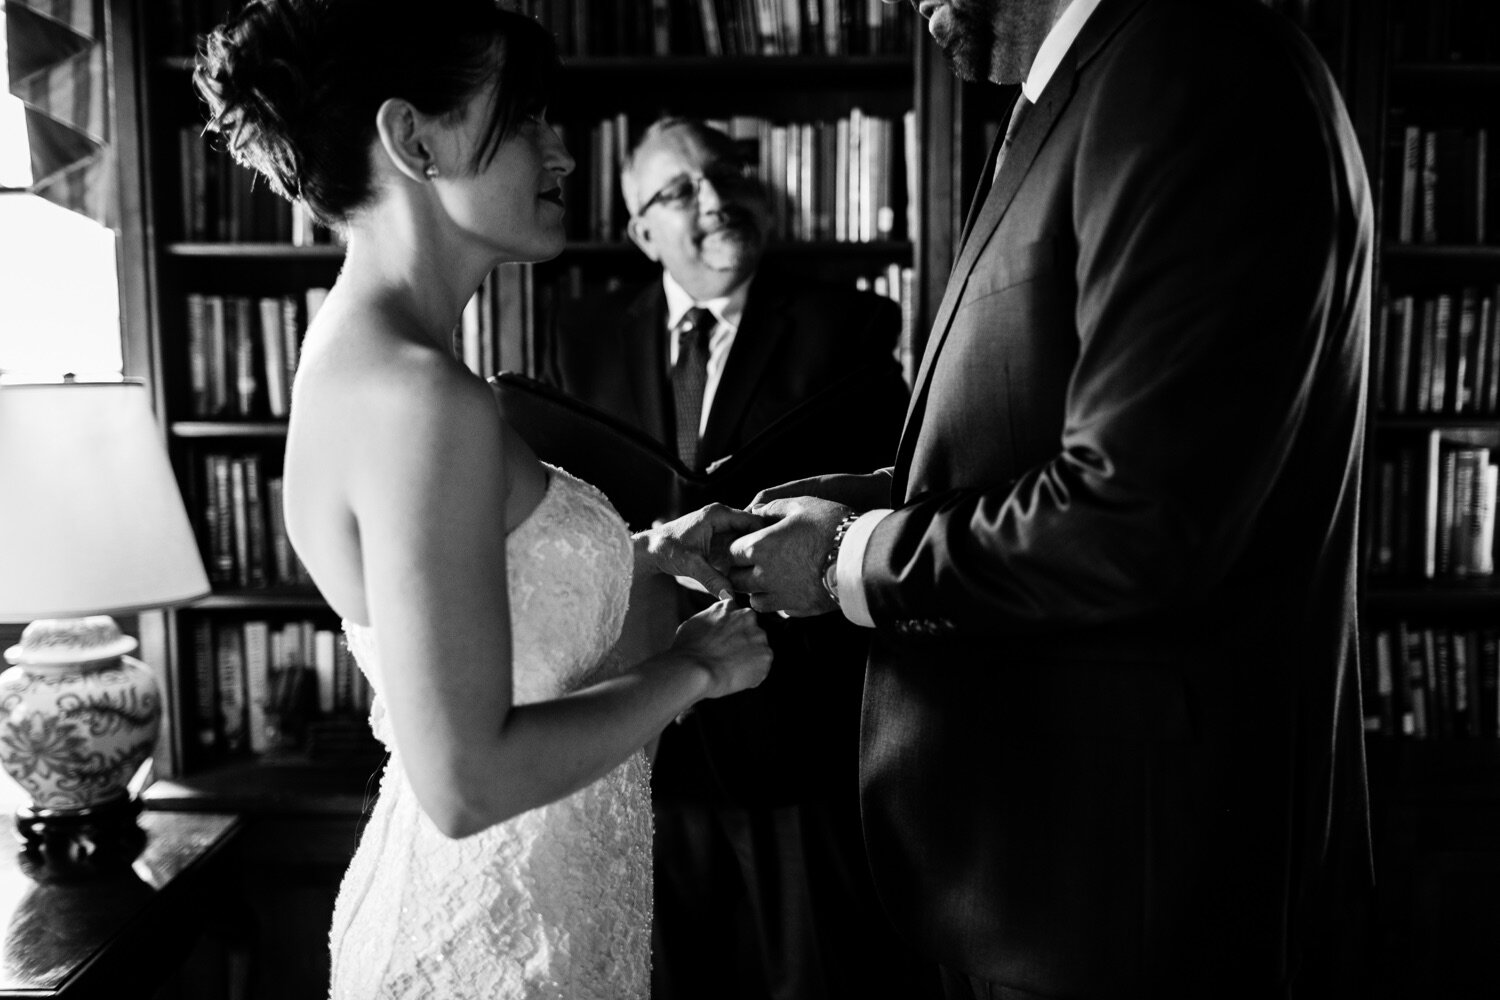 08_Intimate elopement ceremony at the Beekman Arms in Rhinebeck NY.jpg